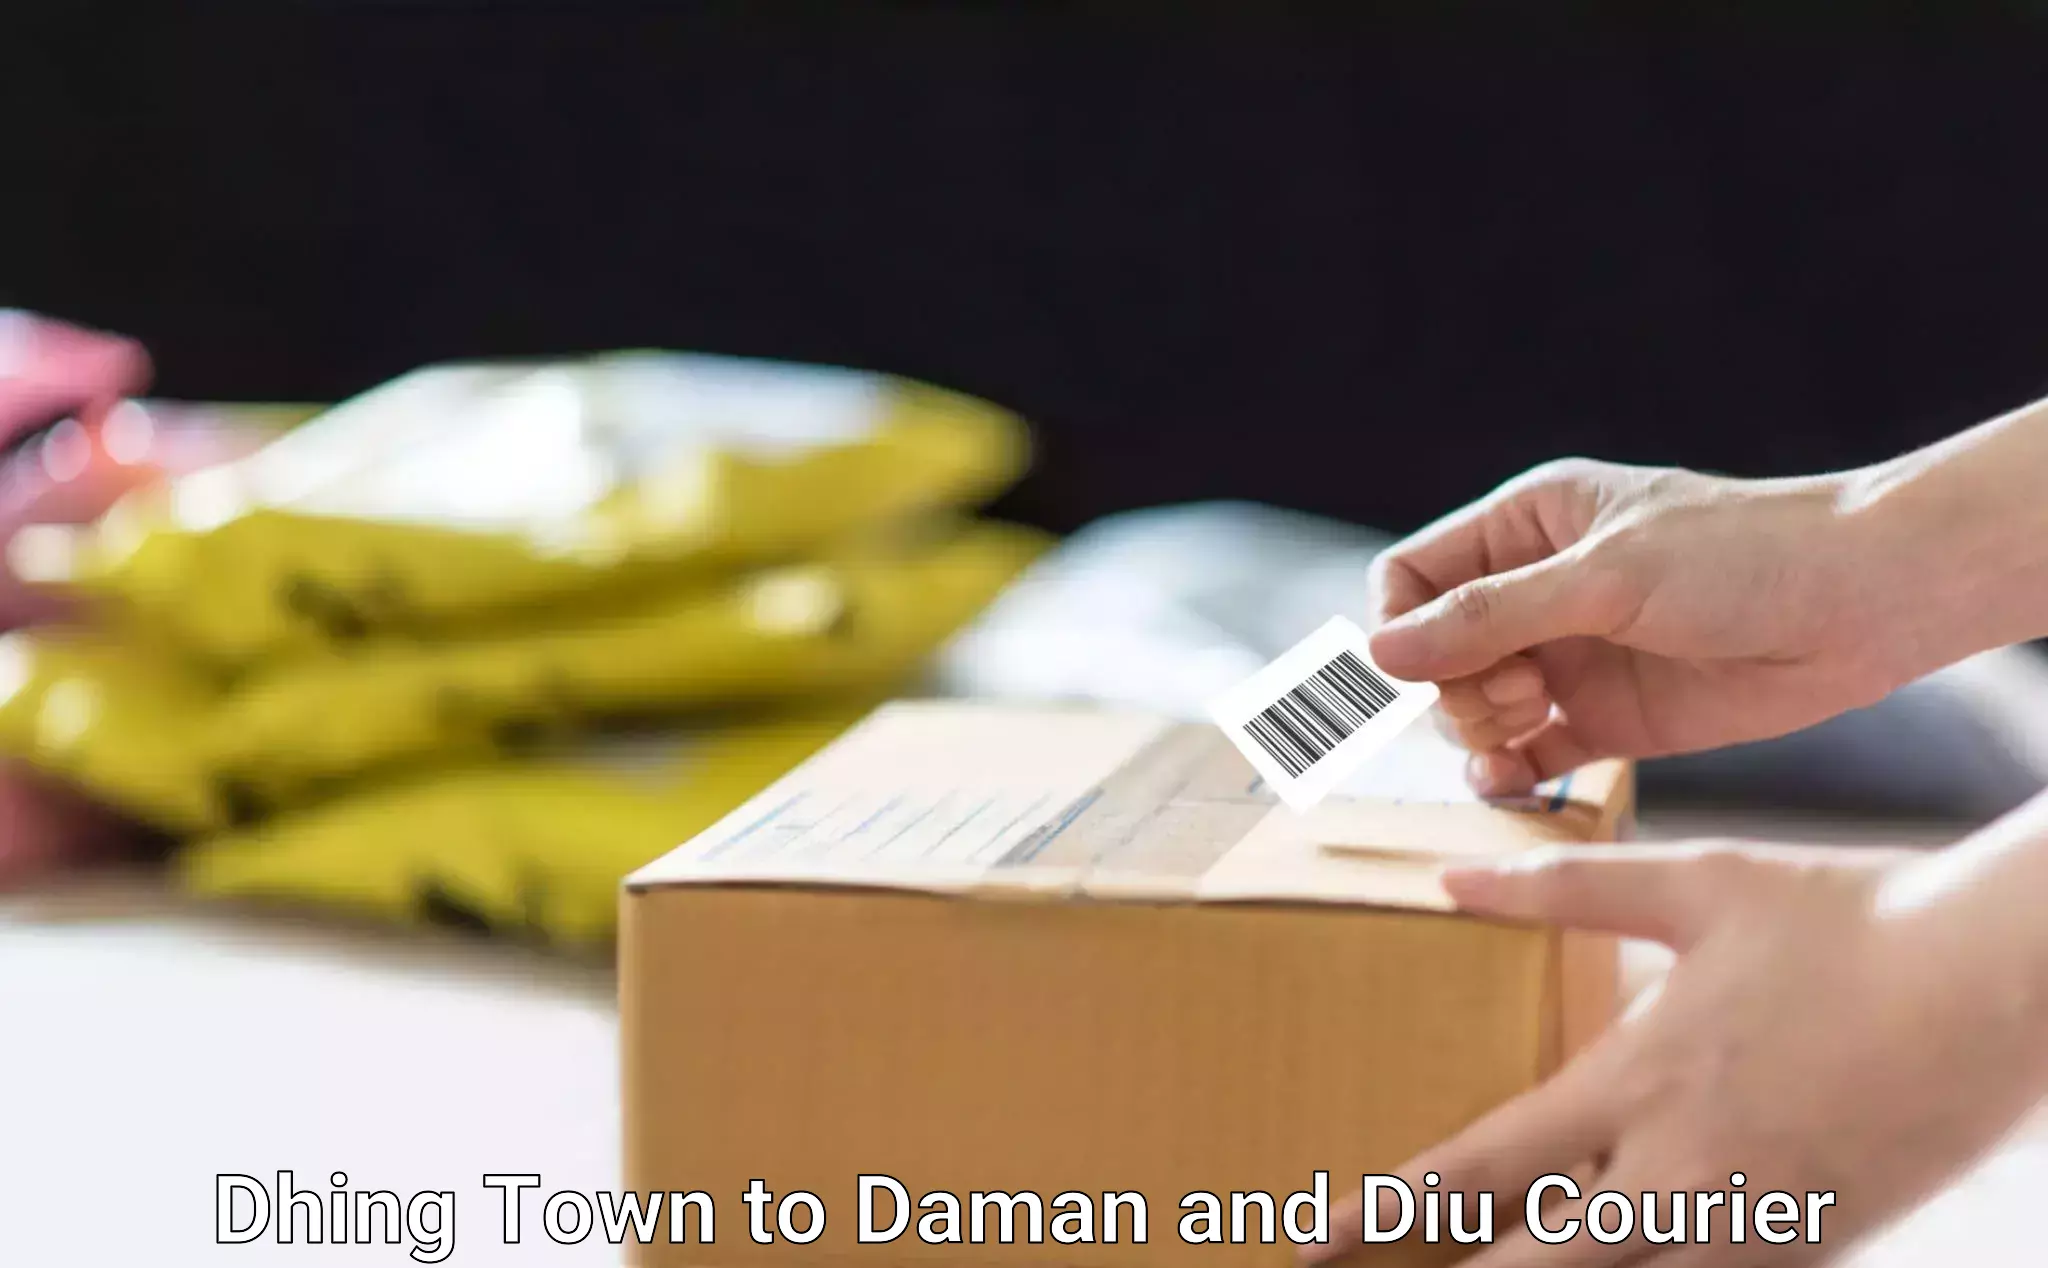 Customer-focused courier Dhing Town to Diu